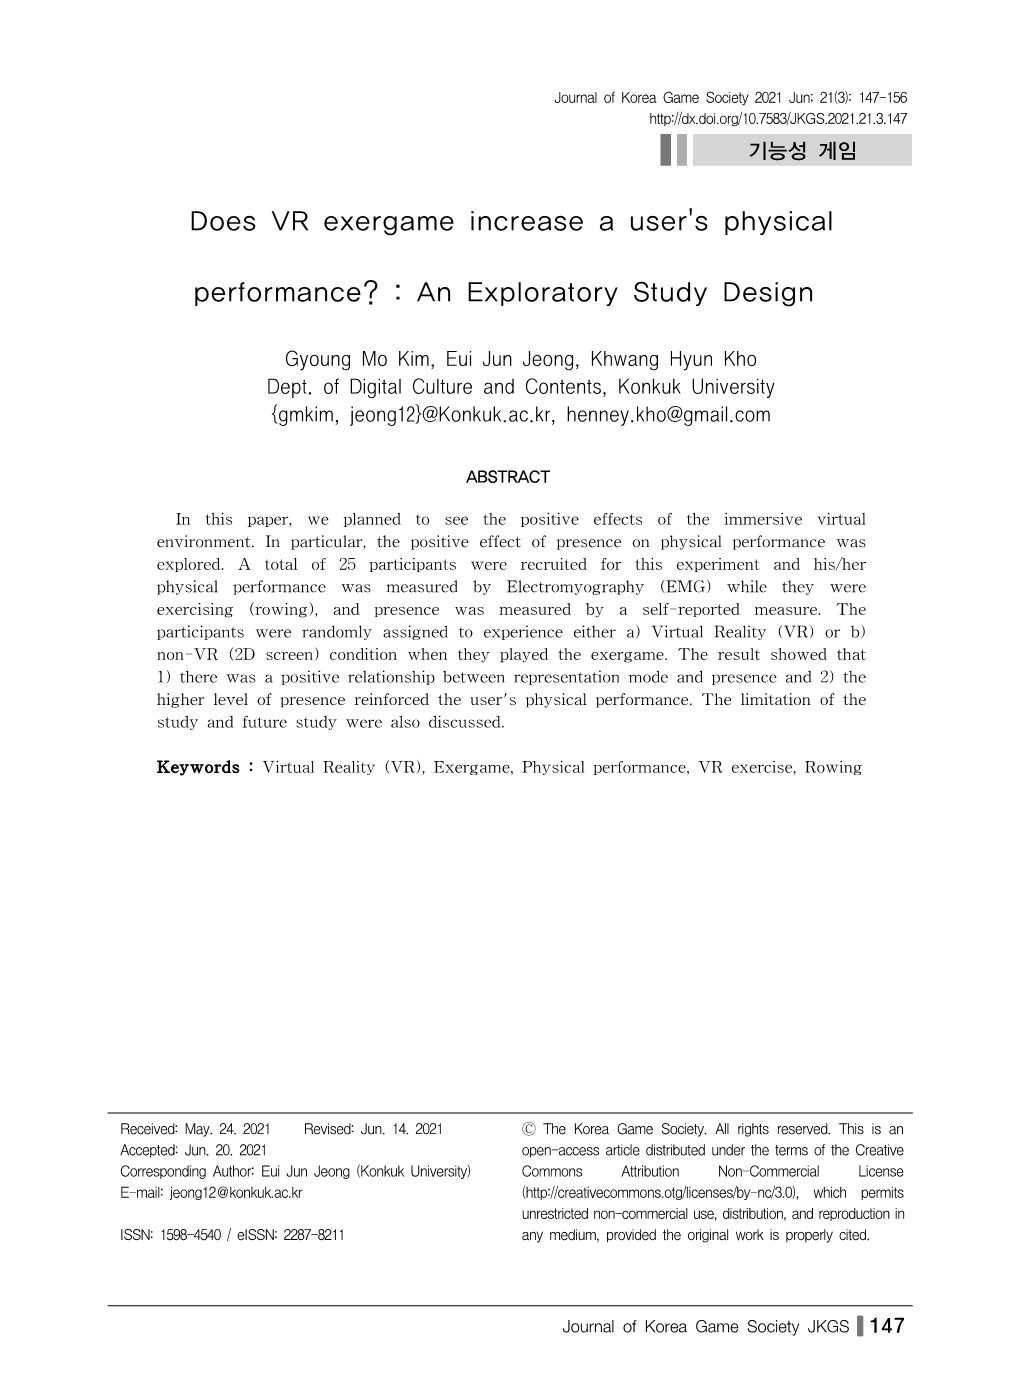 Does VR Exergame Increase a User's Physical Performance? : an Exploratory Study Design ―